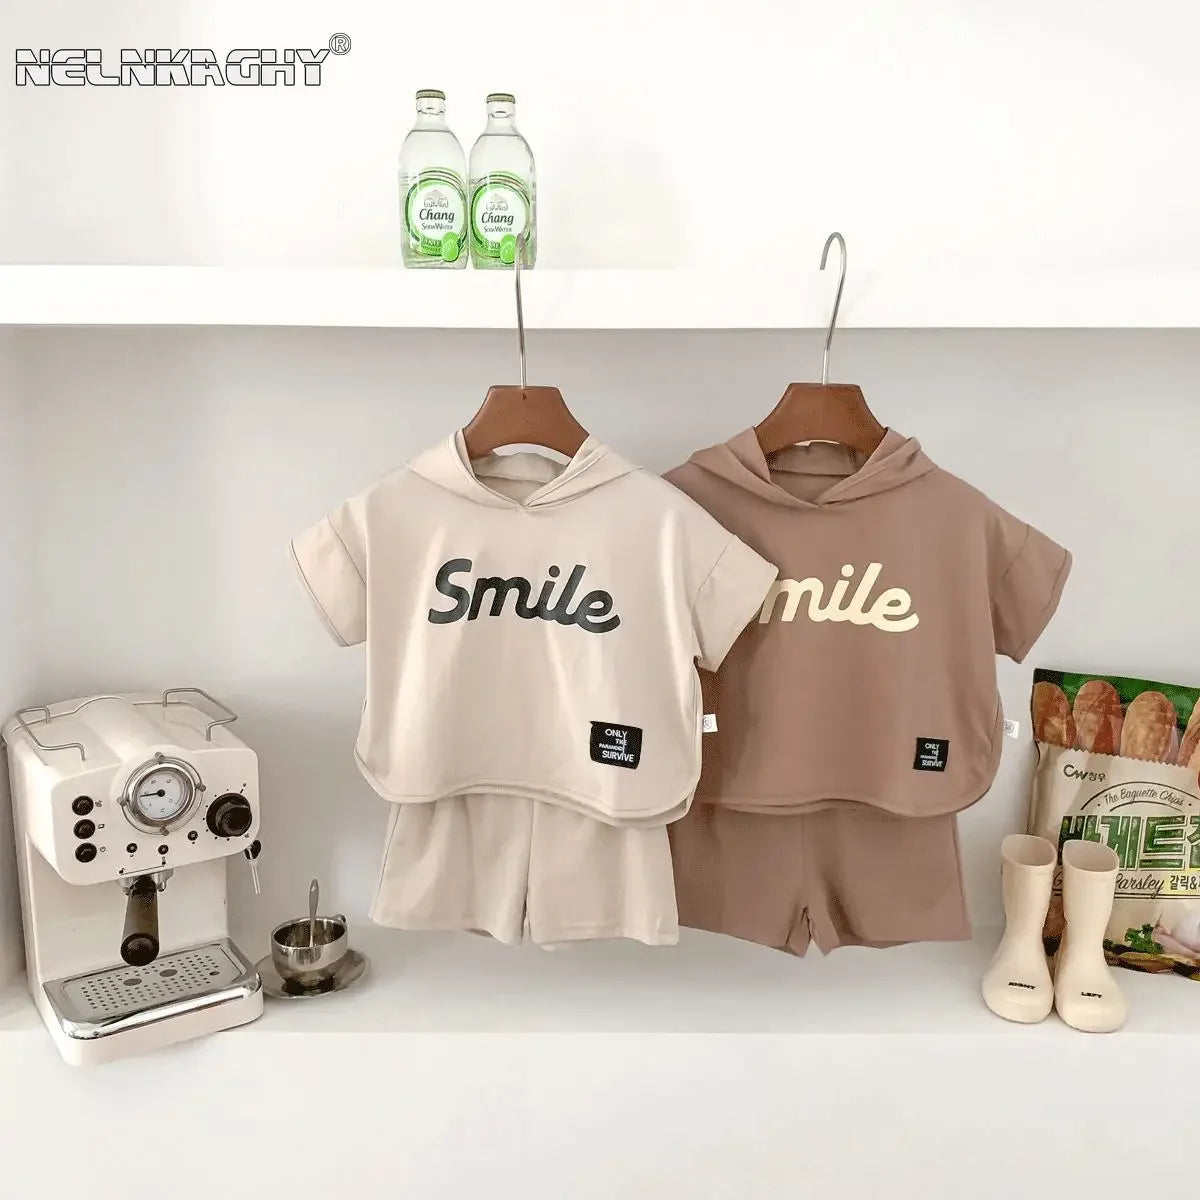 Boys Brown Hooded T shirt 'Smile' and matching shorts